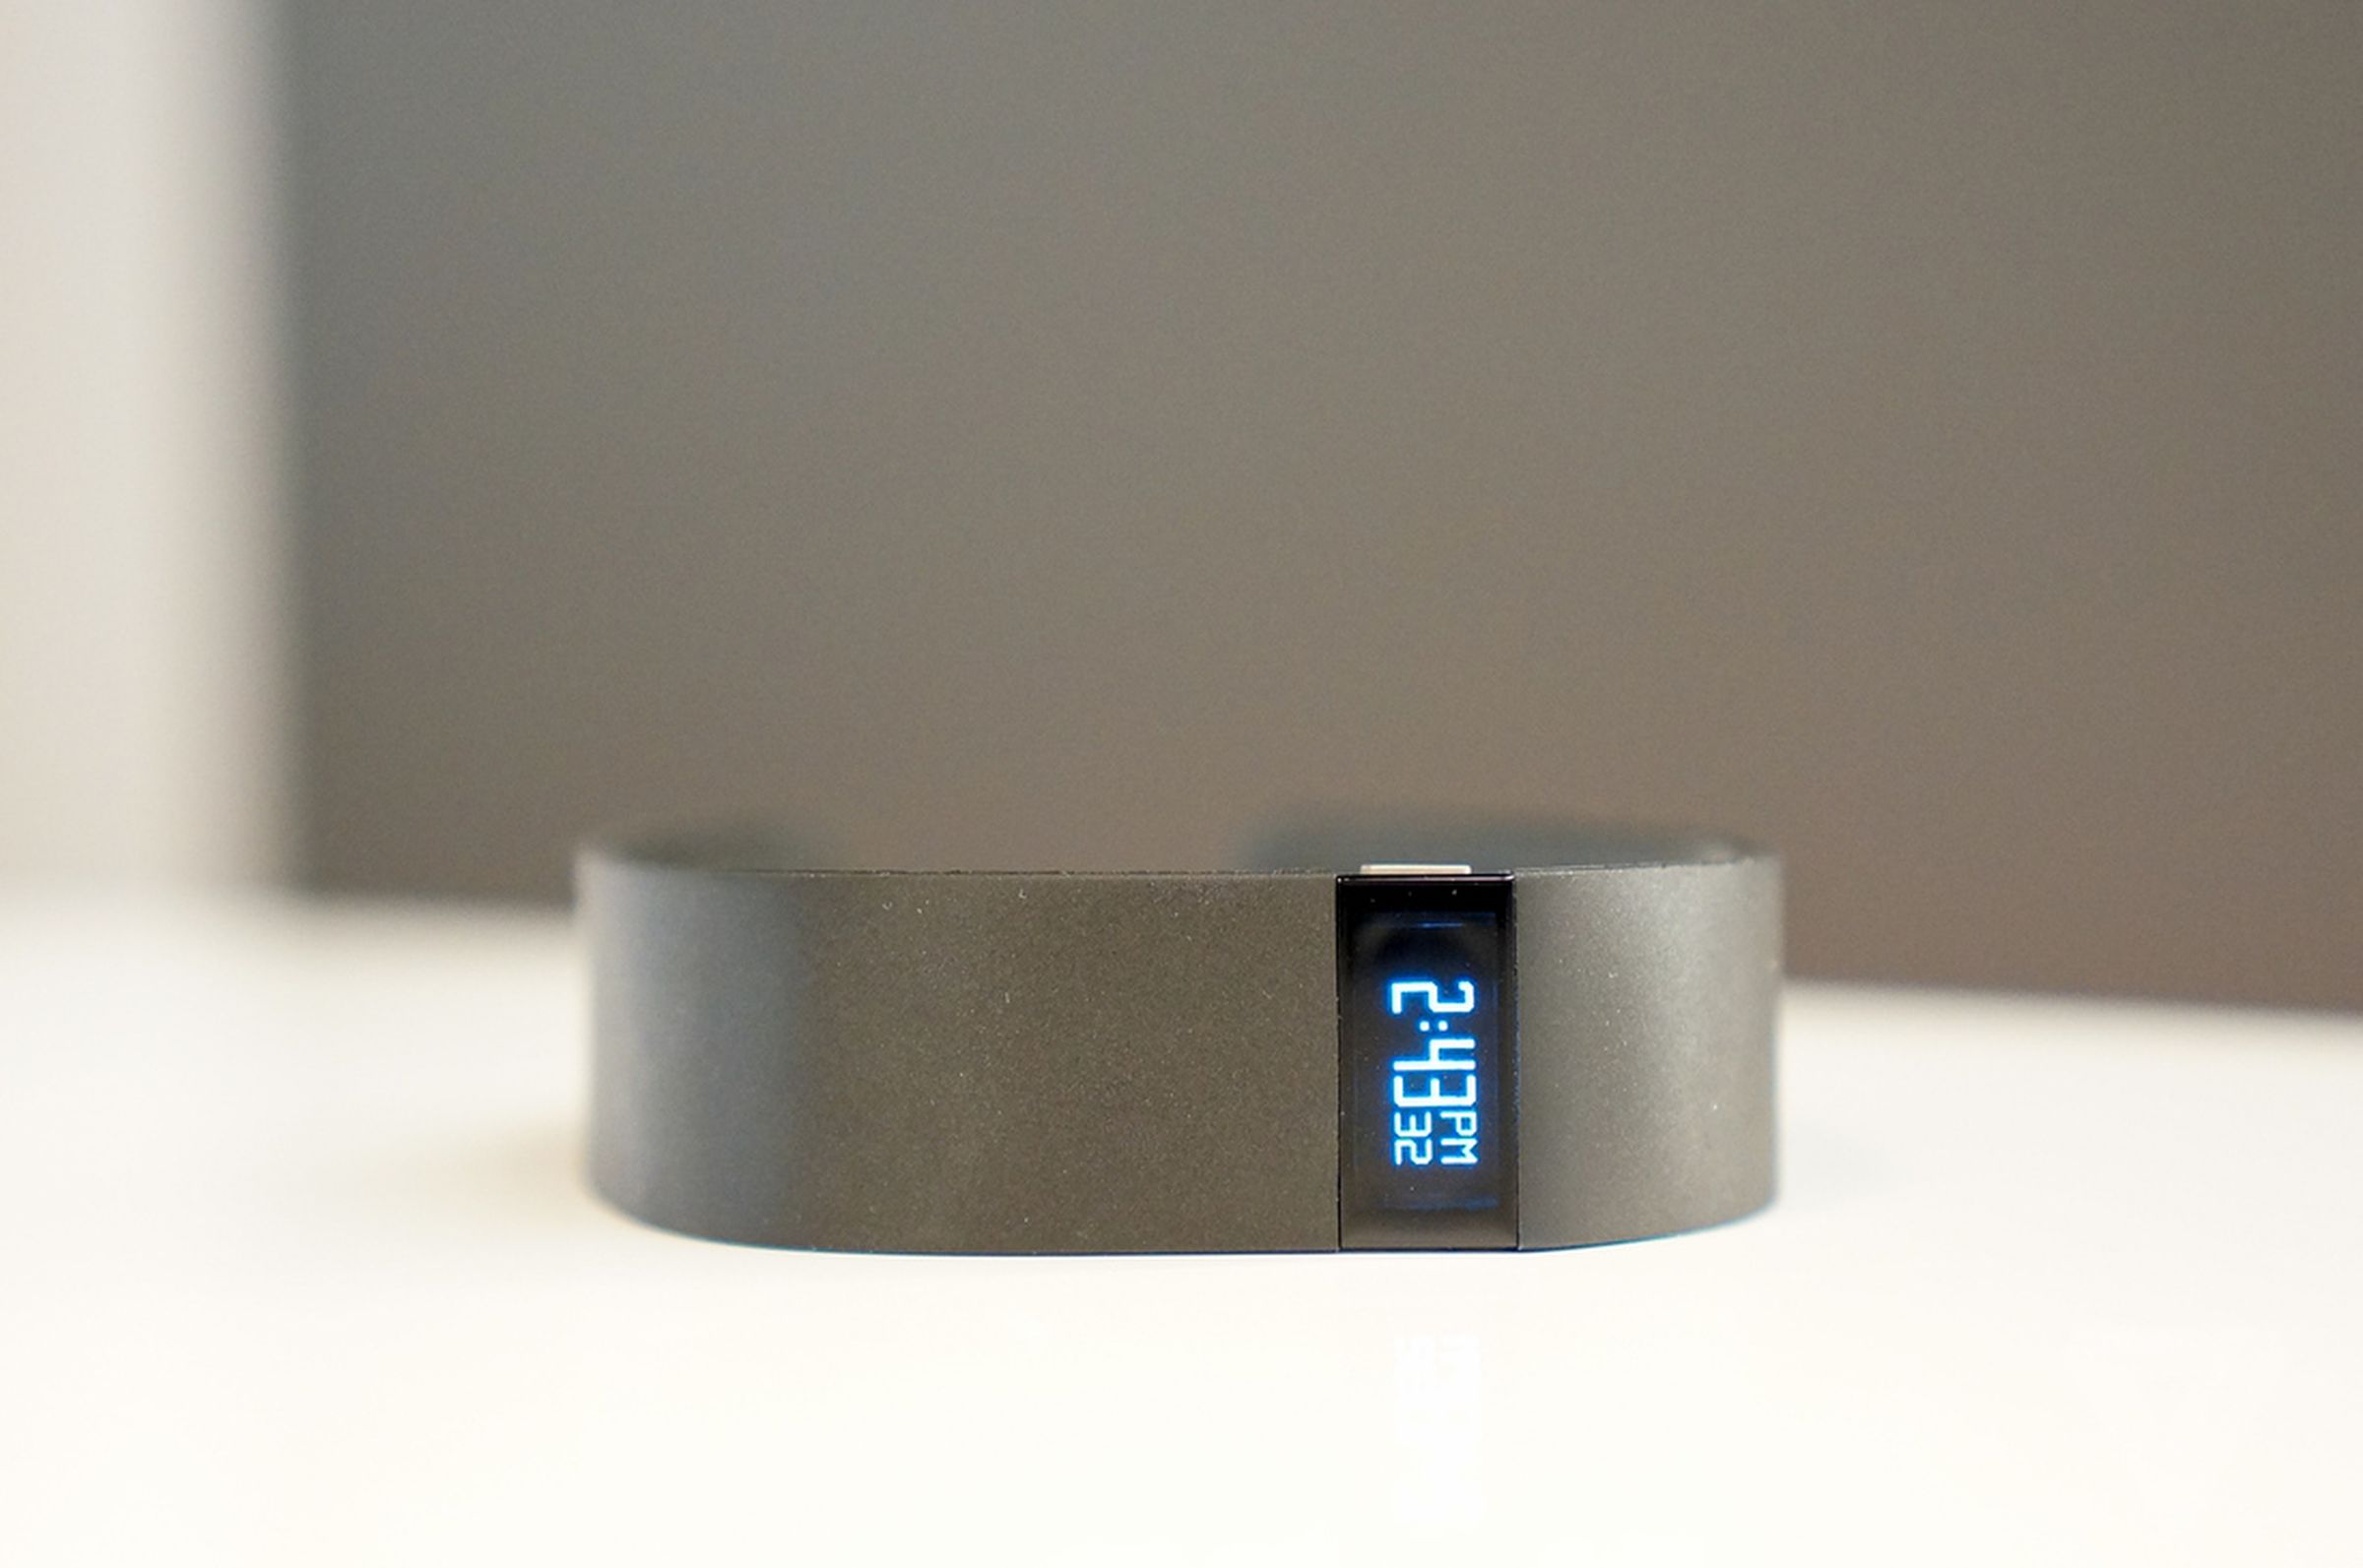 Fitbit Force images